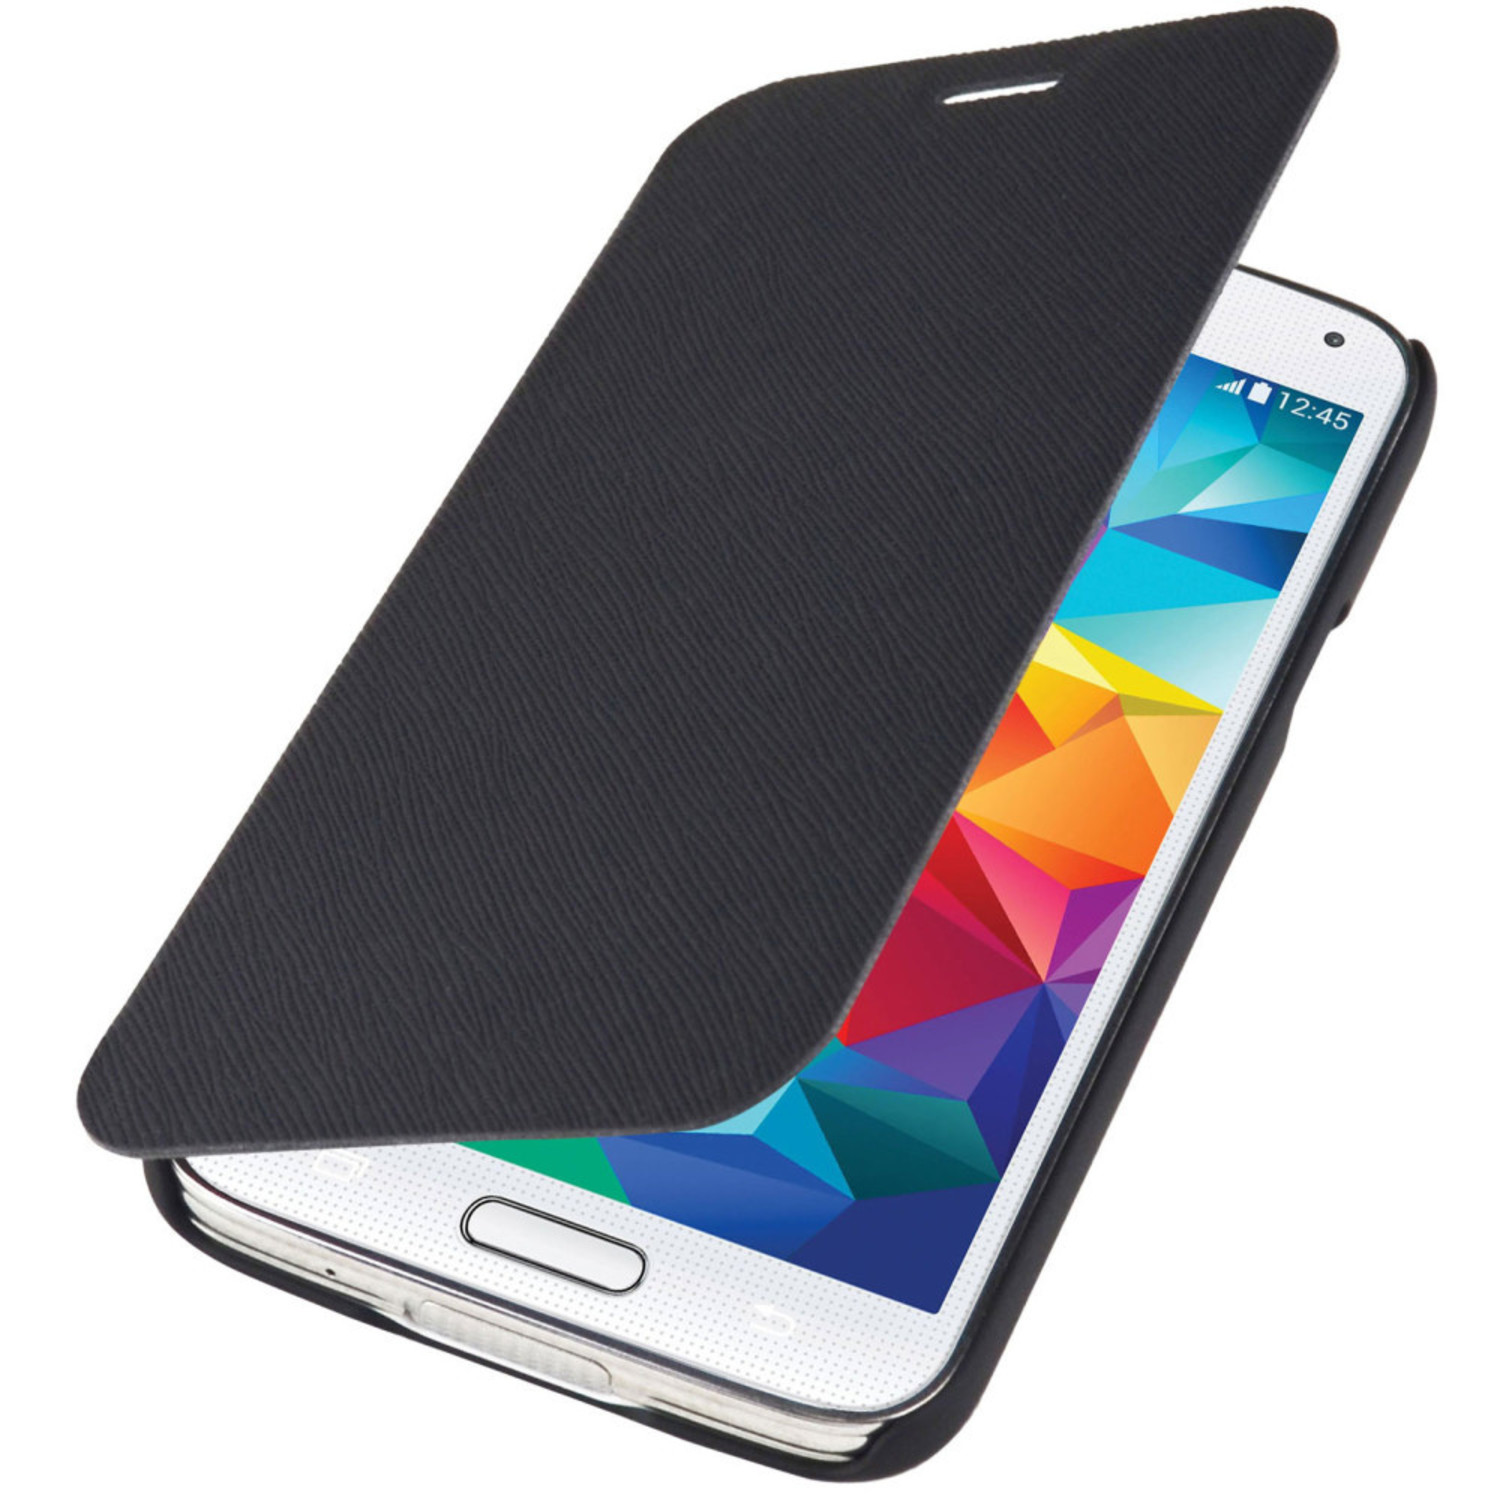 Knorretje Zuiver meer Titicaca Mobiparts Mobiparts Slim Folio Case Samsung Galaxy S5 Black - TelecomShop.nl